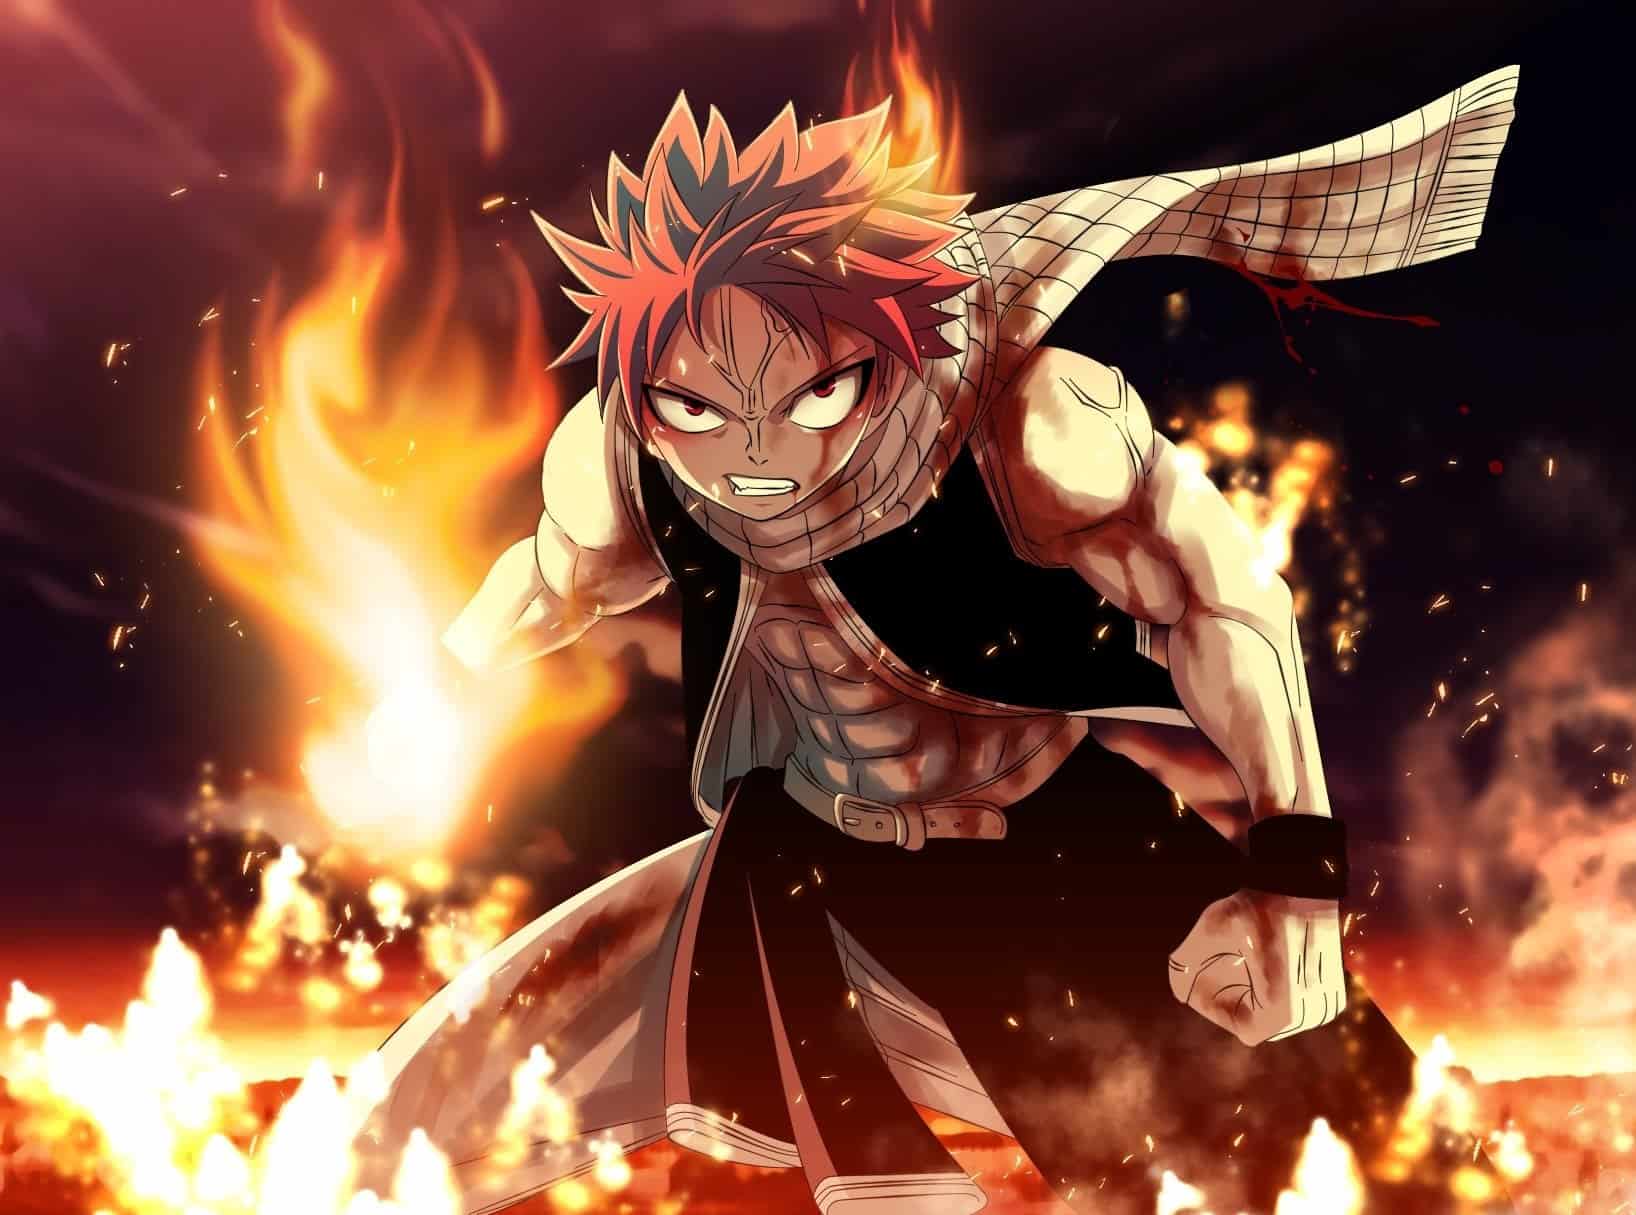 Fairy Tail Filler Arcs 【Episode Guide】